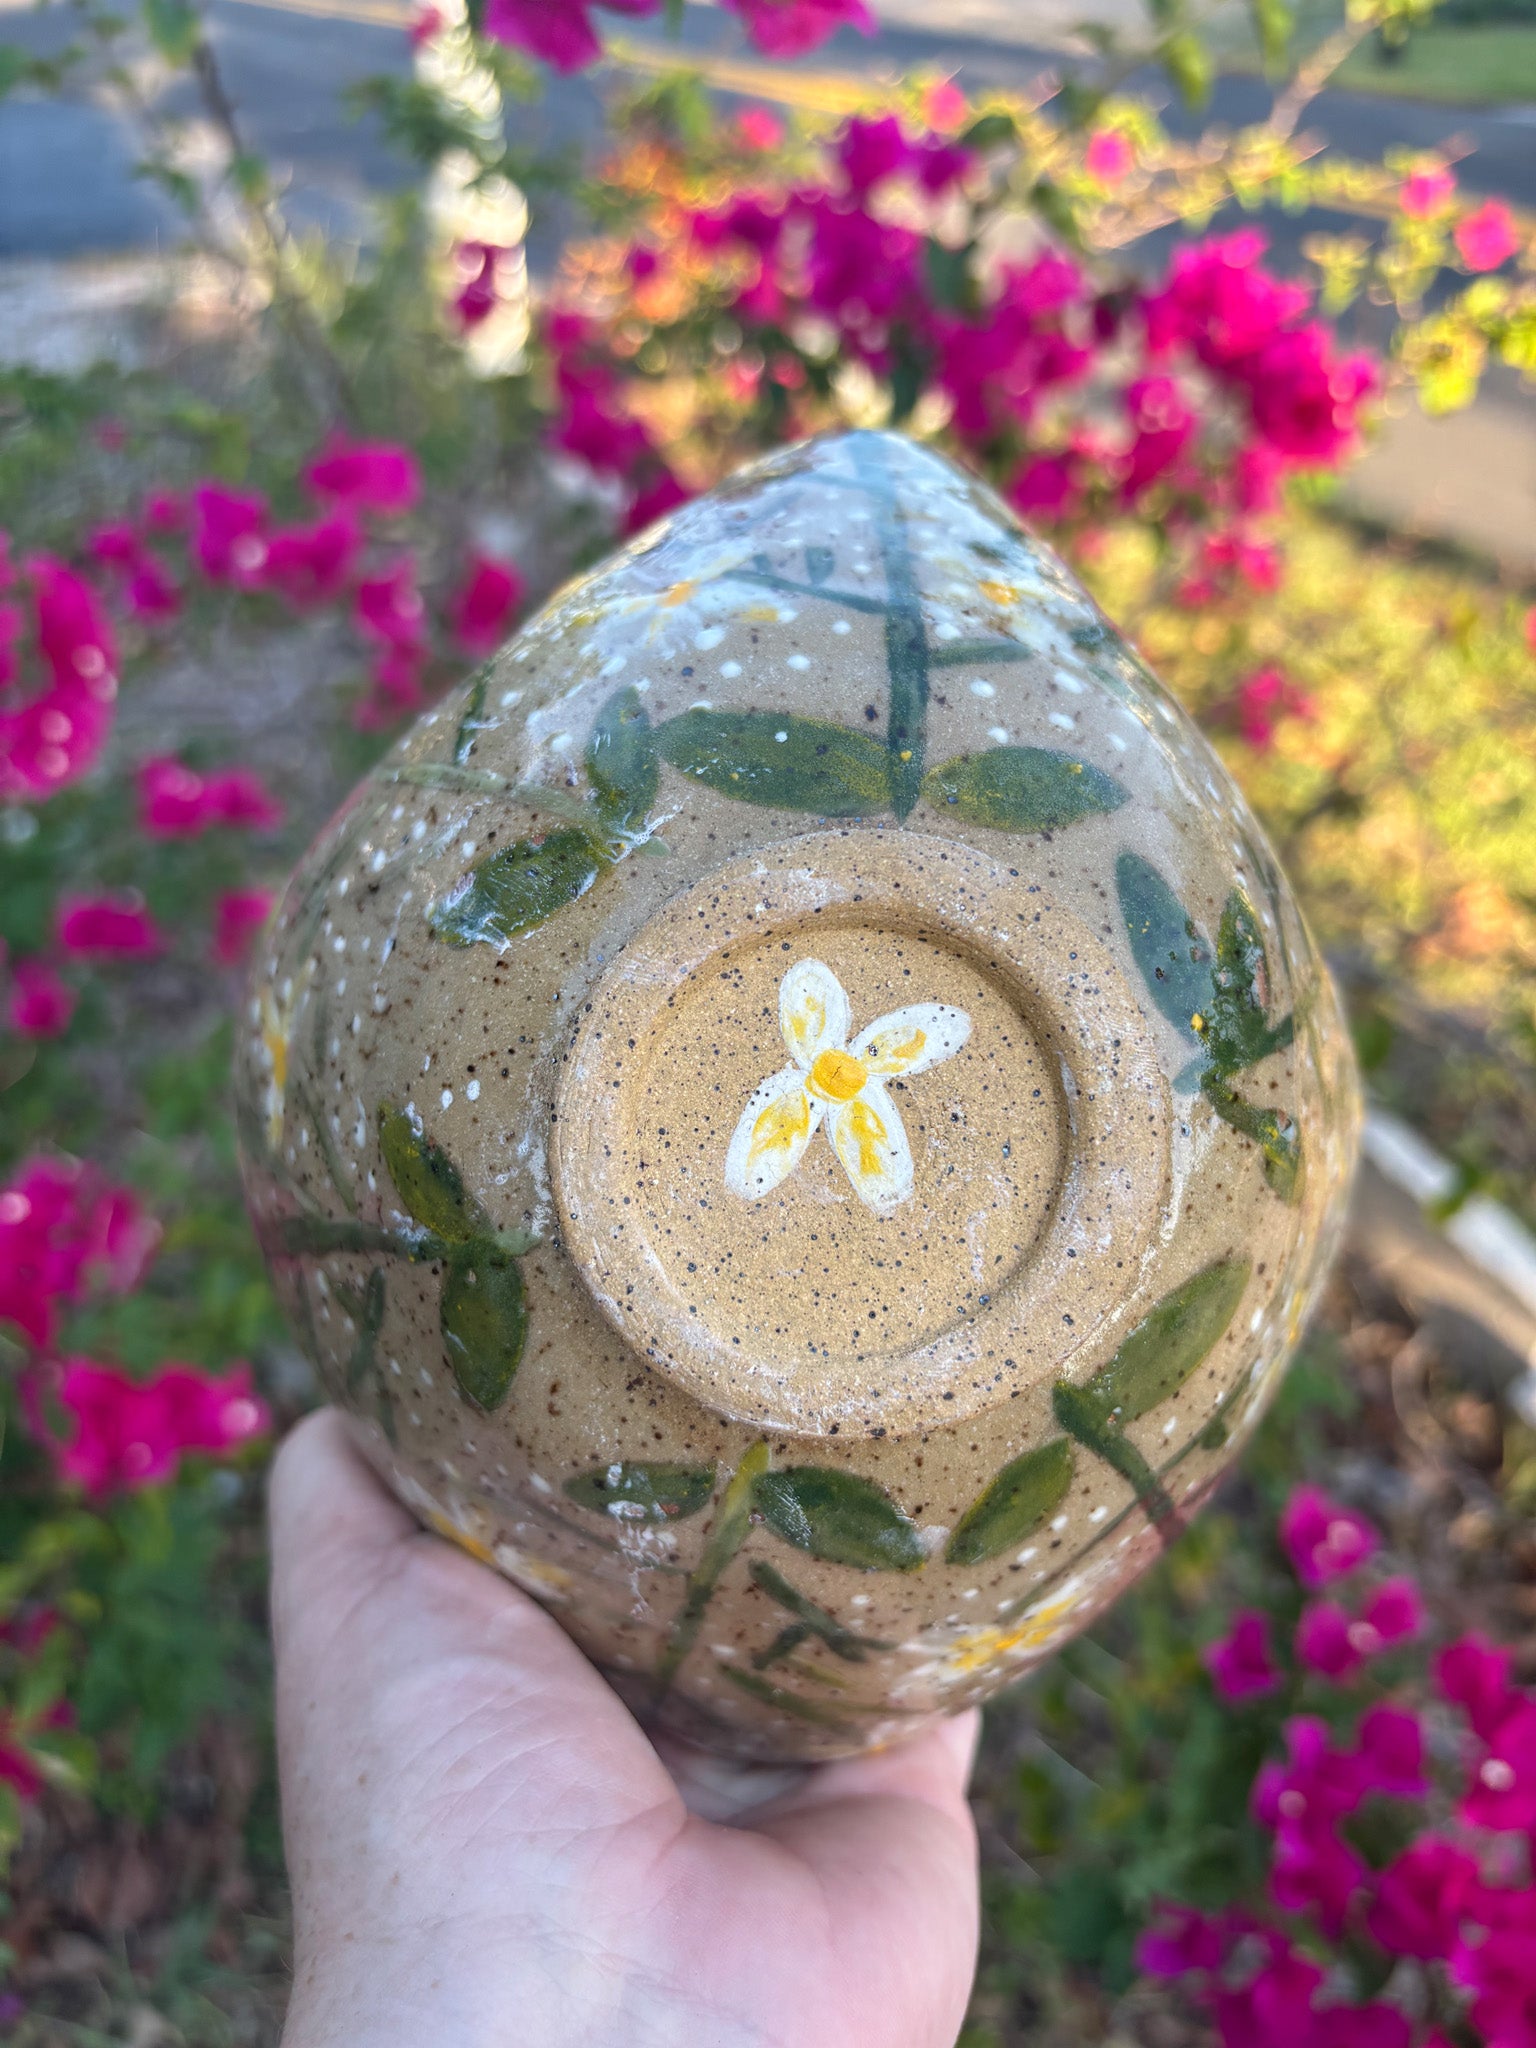 Photo of the bottom of a speckled pottery bowl  painted with white and yellow rue flowers.  The bottom of the bowl has a hand painted blossom in the foot ring.  The bowl is held in the artist's hand and set against a background of bushes with pink flowers.